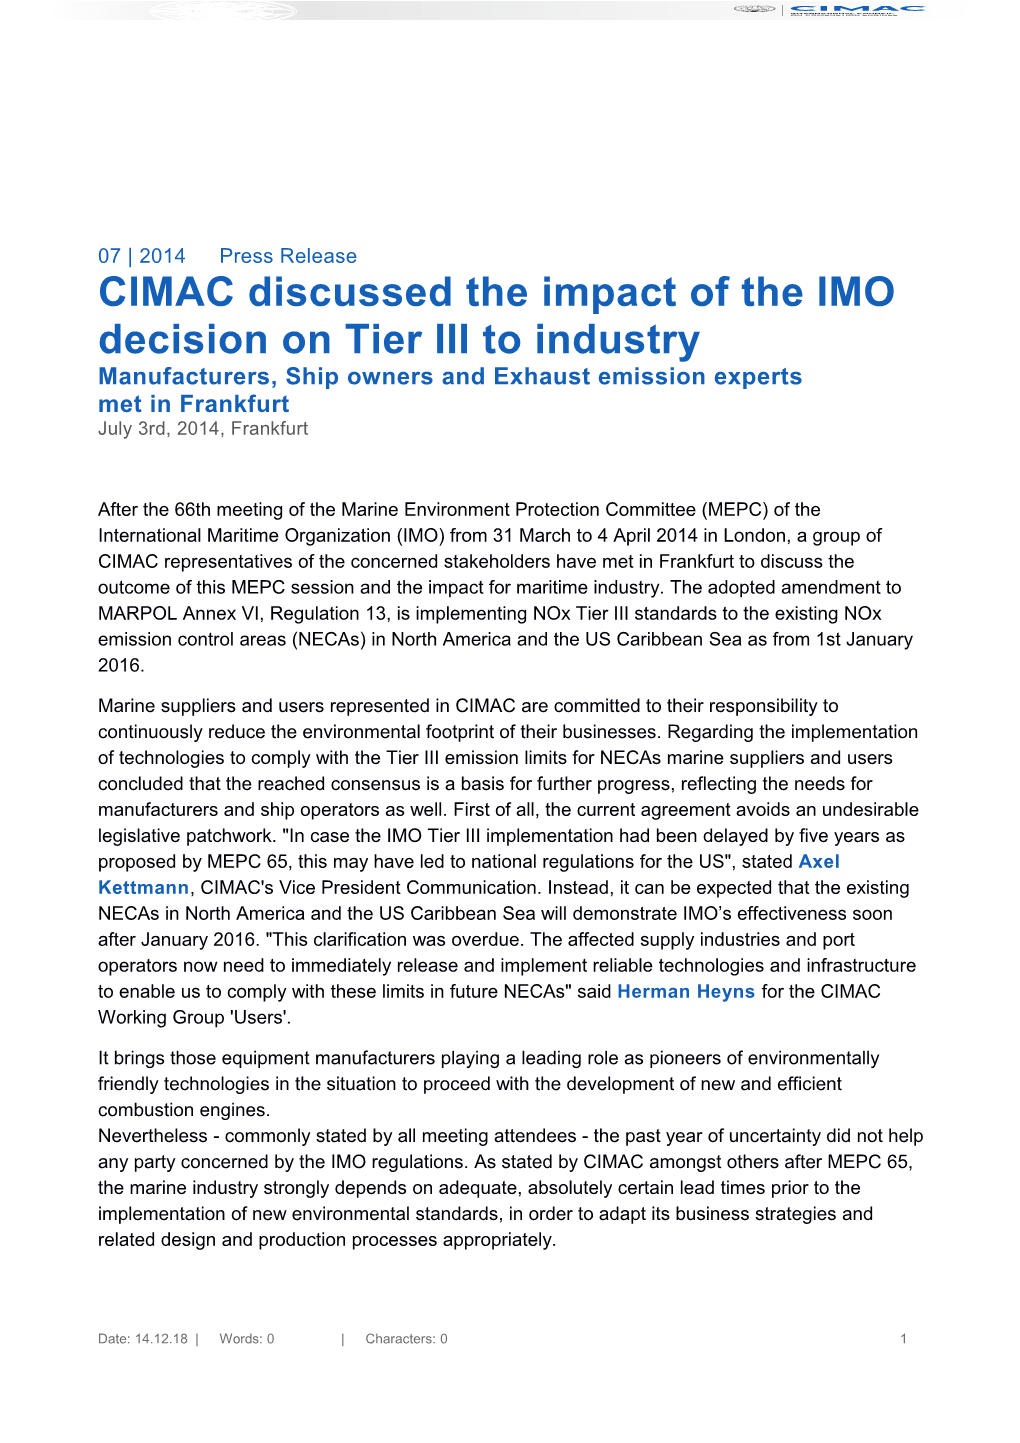 CIMAC Discussed the Impact of the IMO Decision on Tier III to Industry